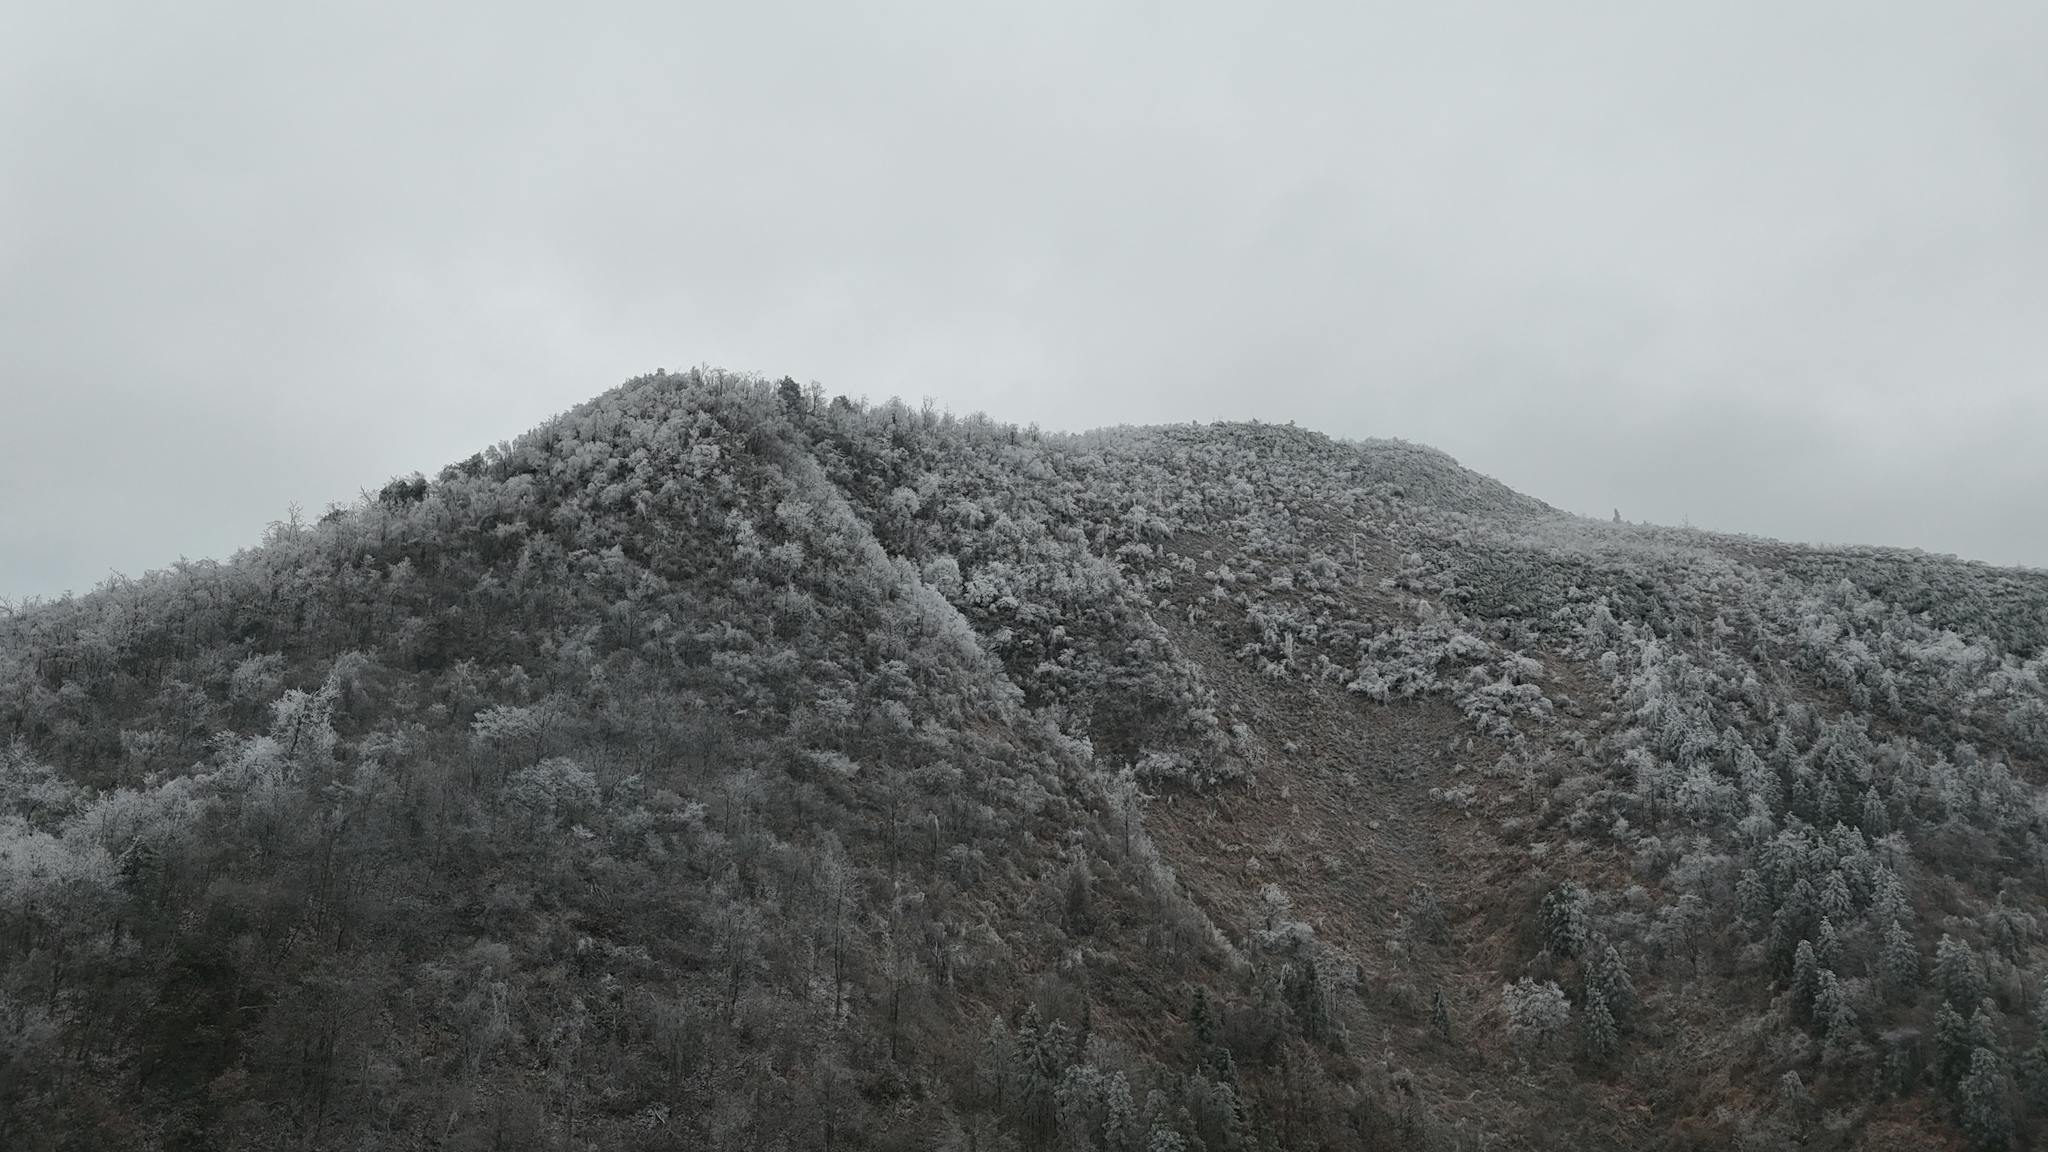 The ridge after the first snow